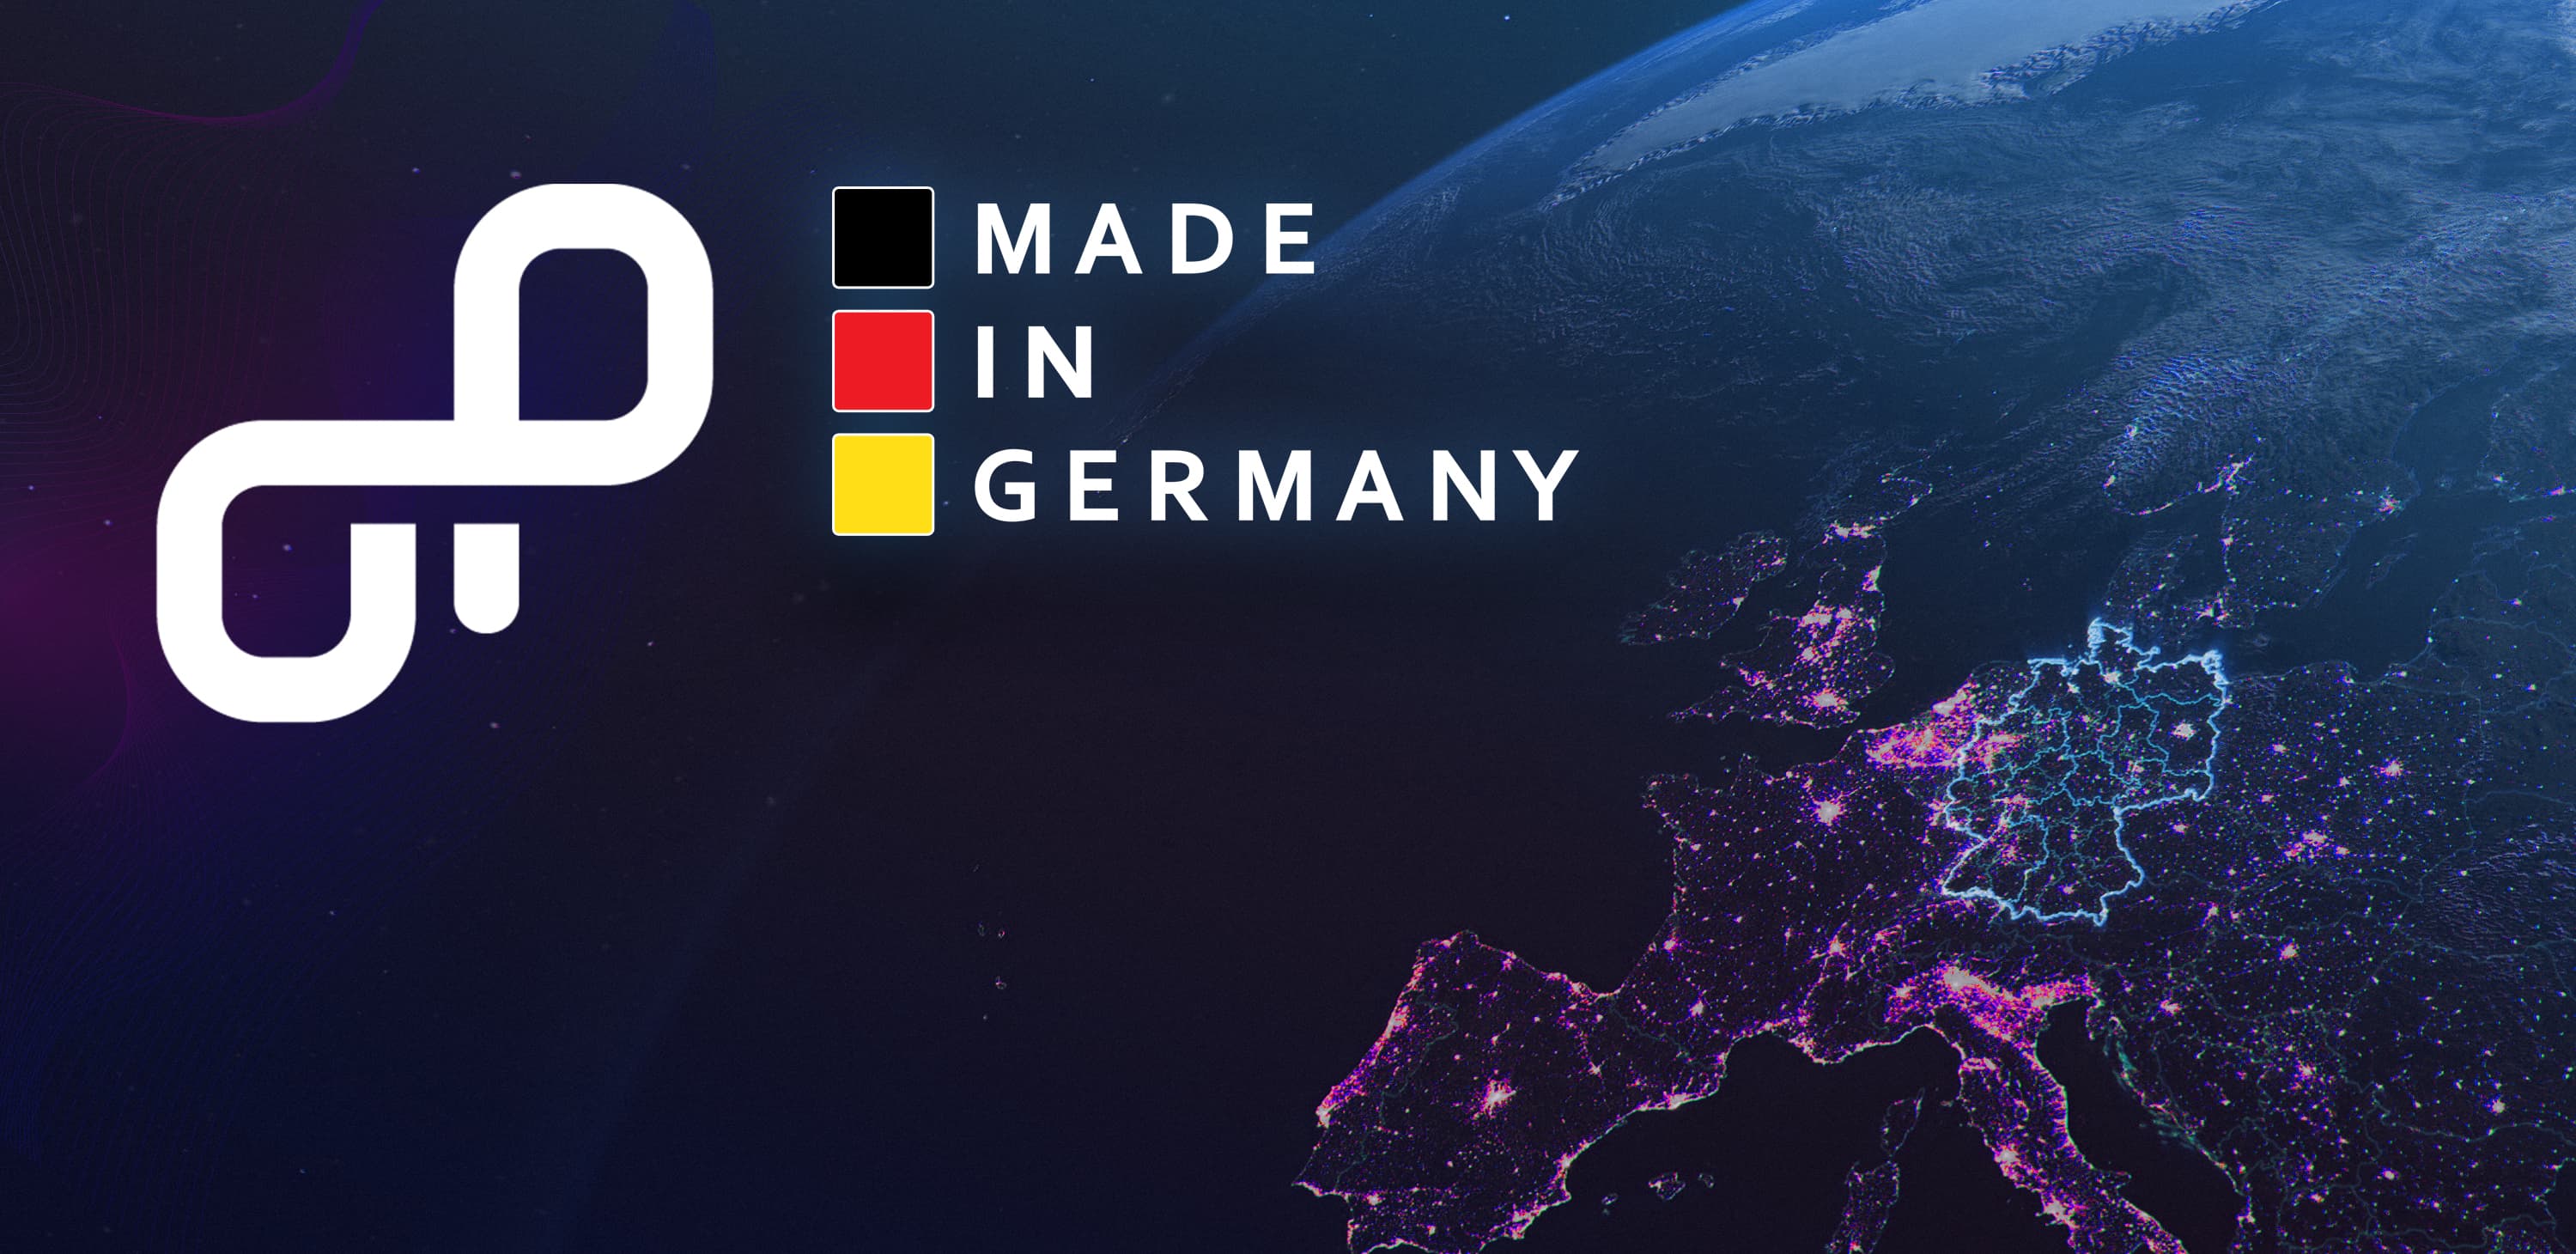 OpenProject and Made in Germany on blue background with world map